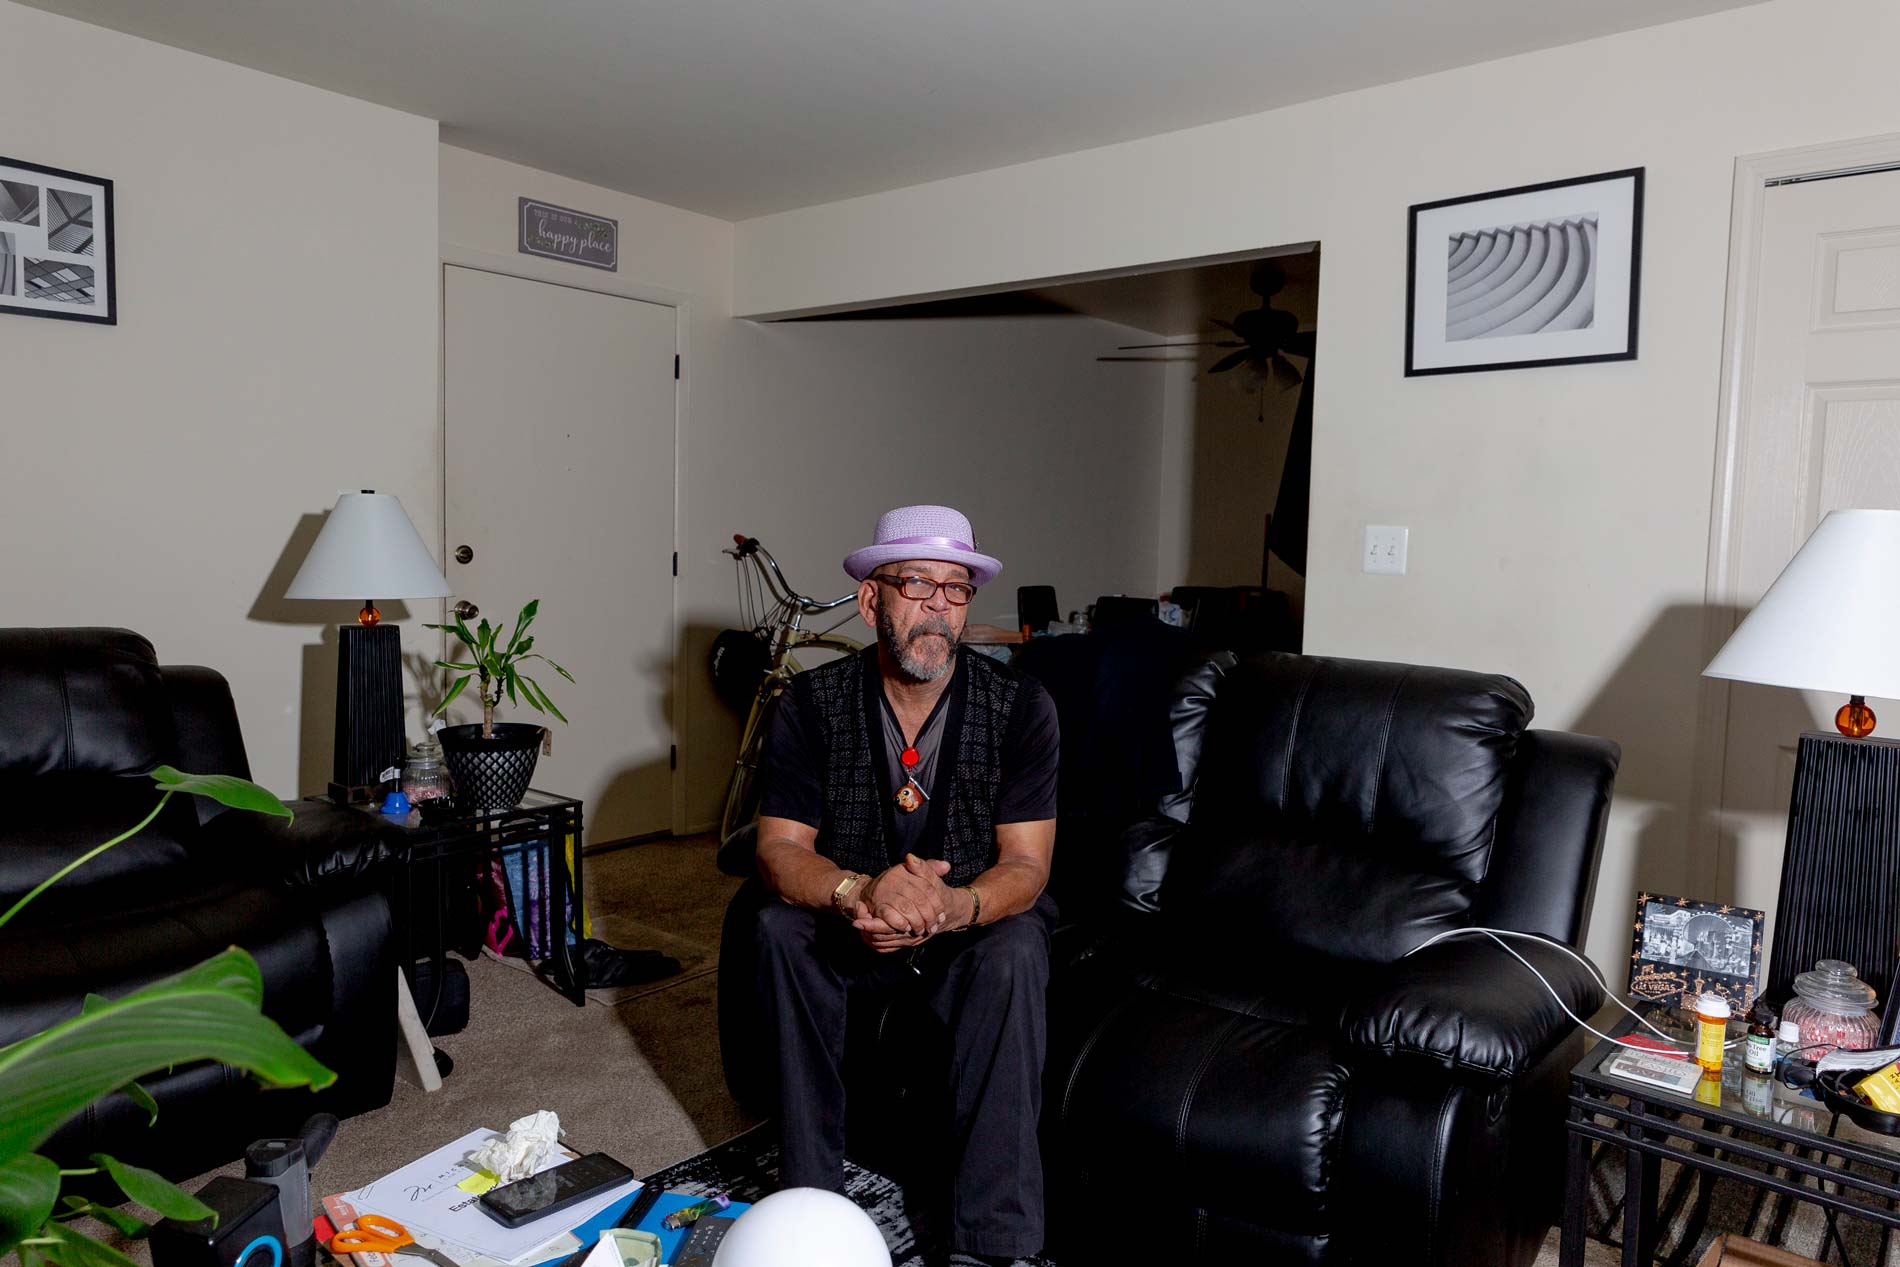 Gerry Thomas, 64, at his apartment in Sterling Heights, Michigan on Feb. 7, 2022. (Image: Sylvia Jarrus/Innocence Project)